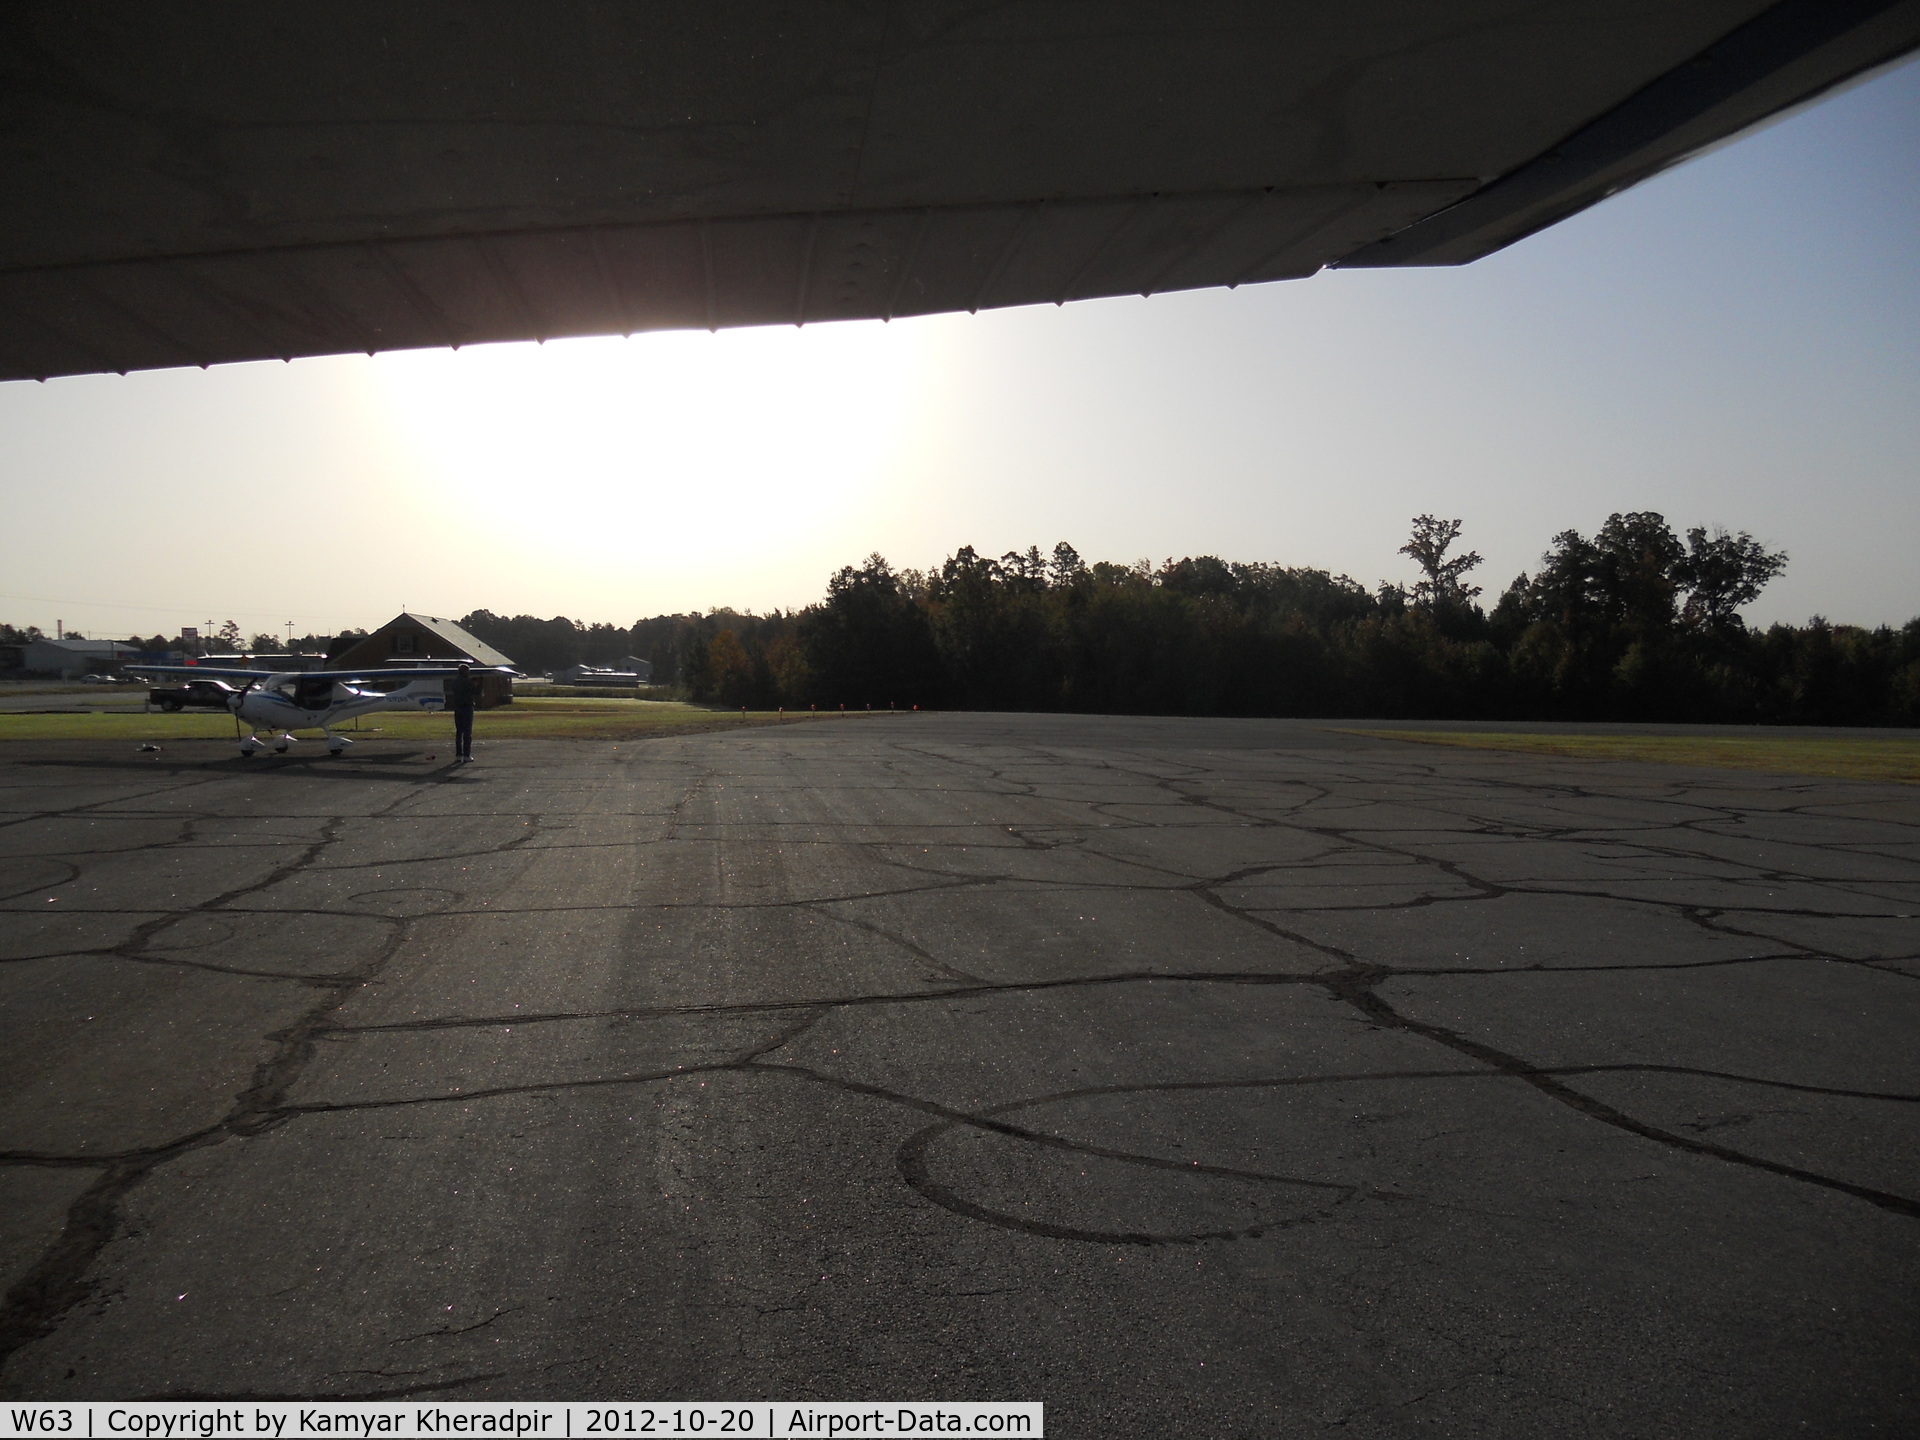 Lake Country Regional Airport (W63) - Early morning